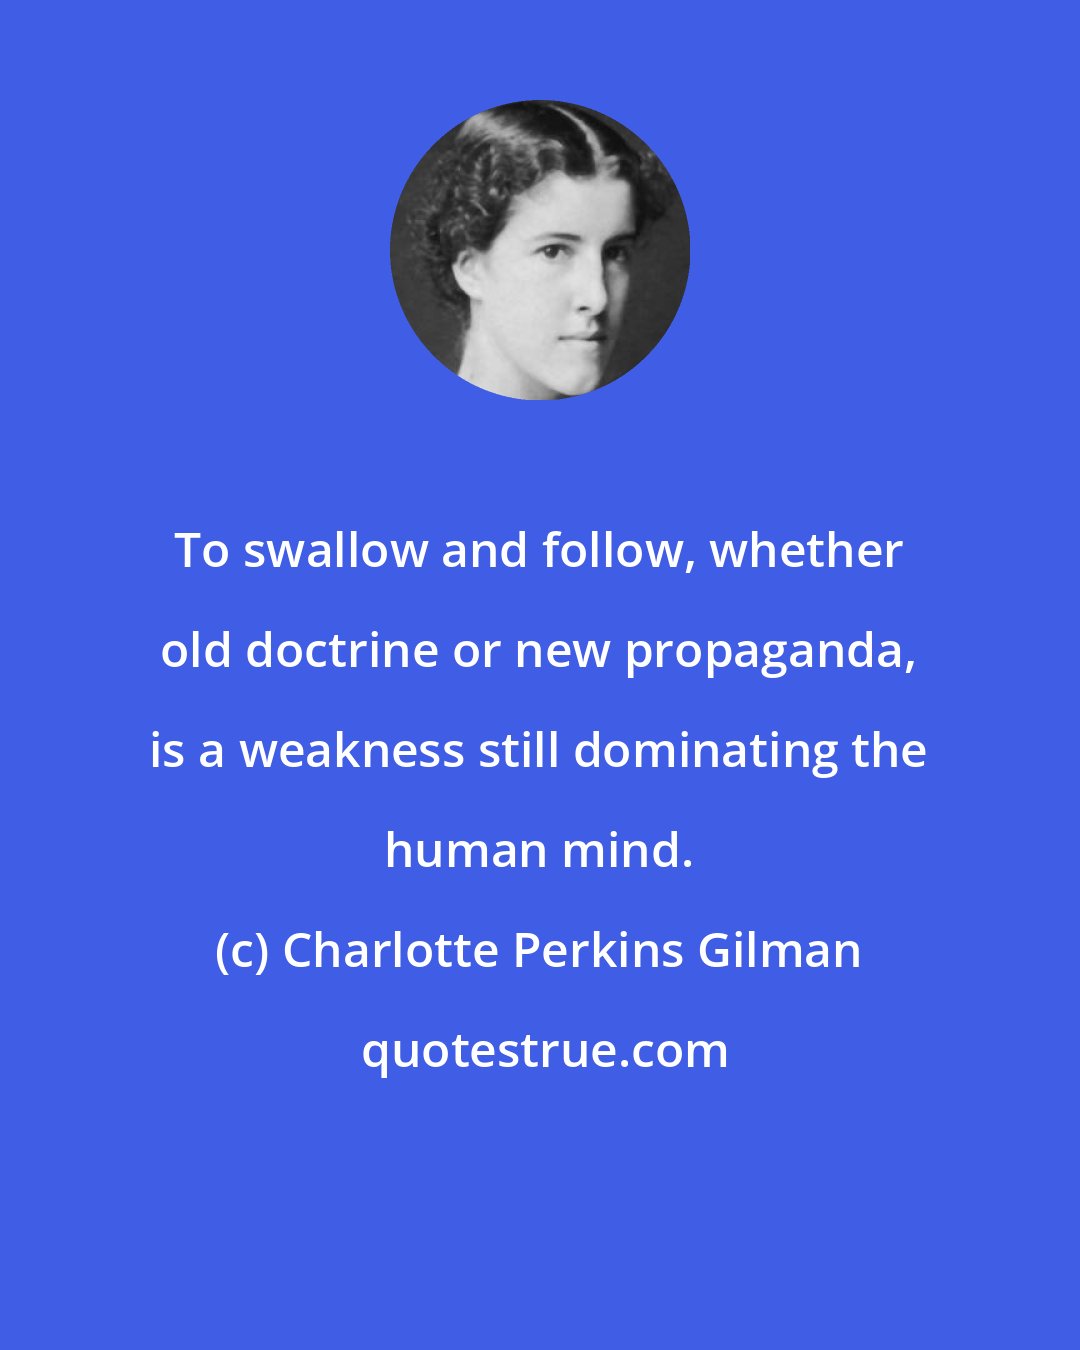 Charlotte Perkins Gilman: To swallow and follow, whether old doctrine or new propaganda, is a weakness still dominating the human mind.